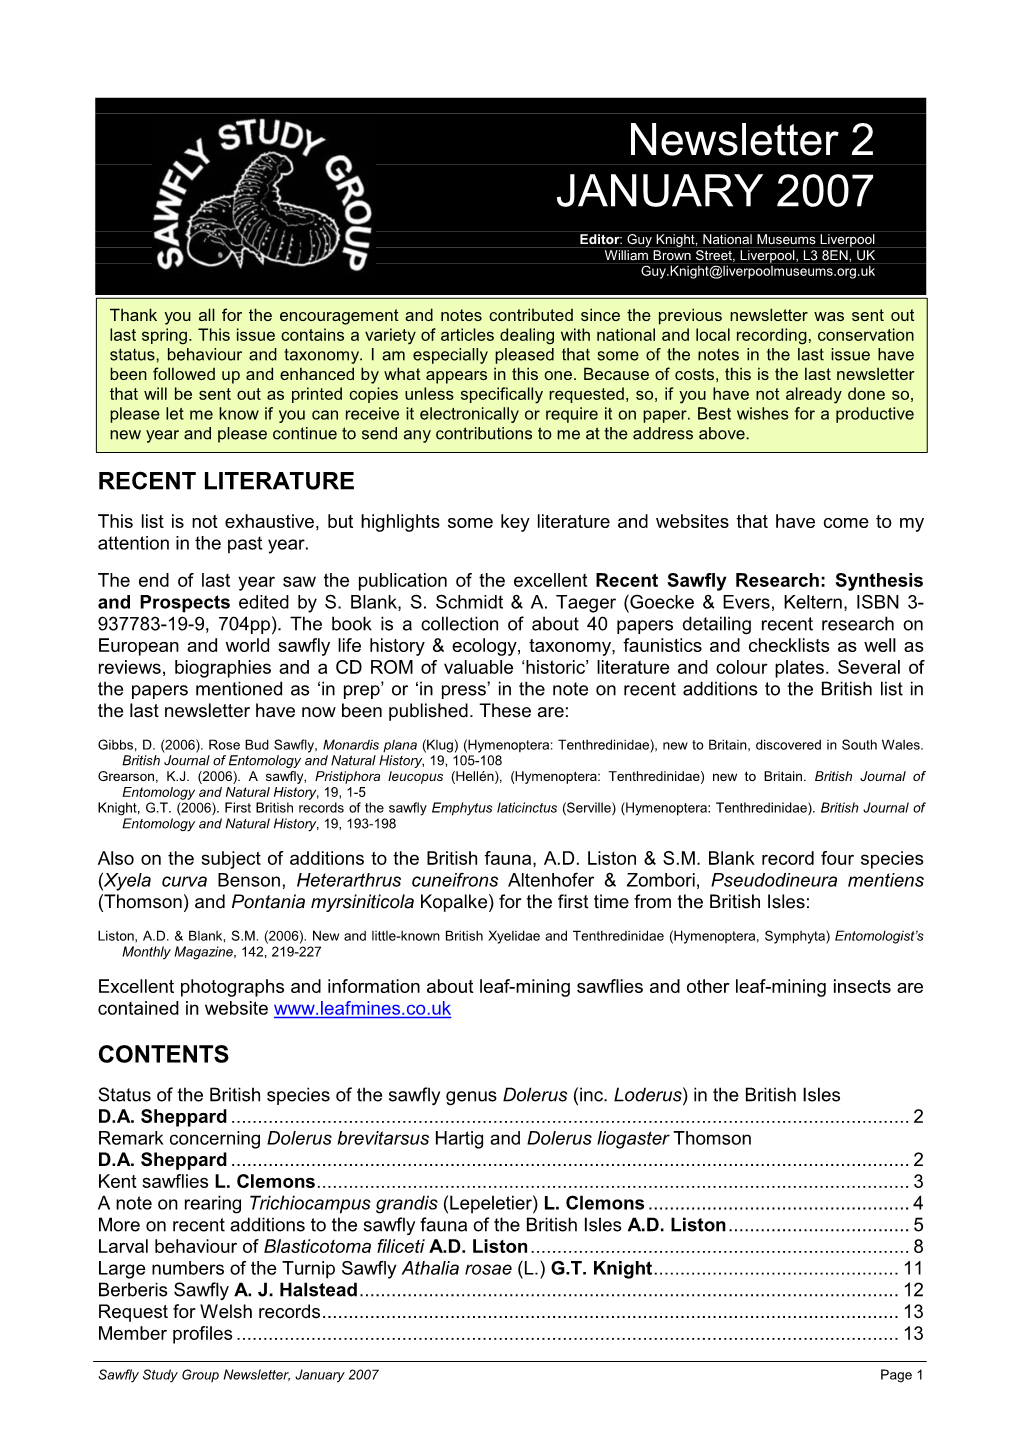 Sawfly Study Group Newsletter 2